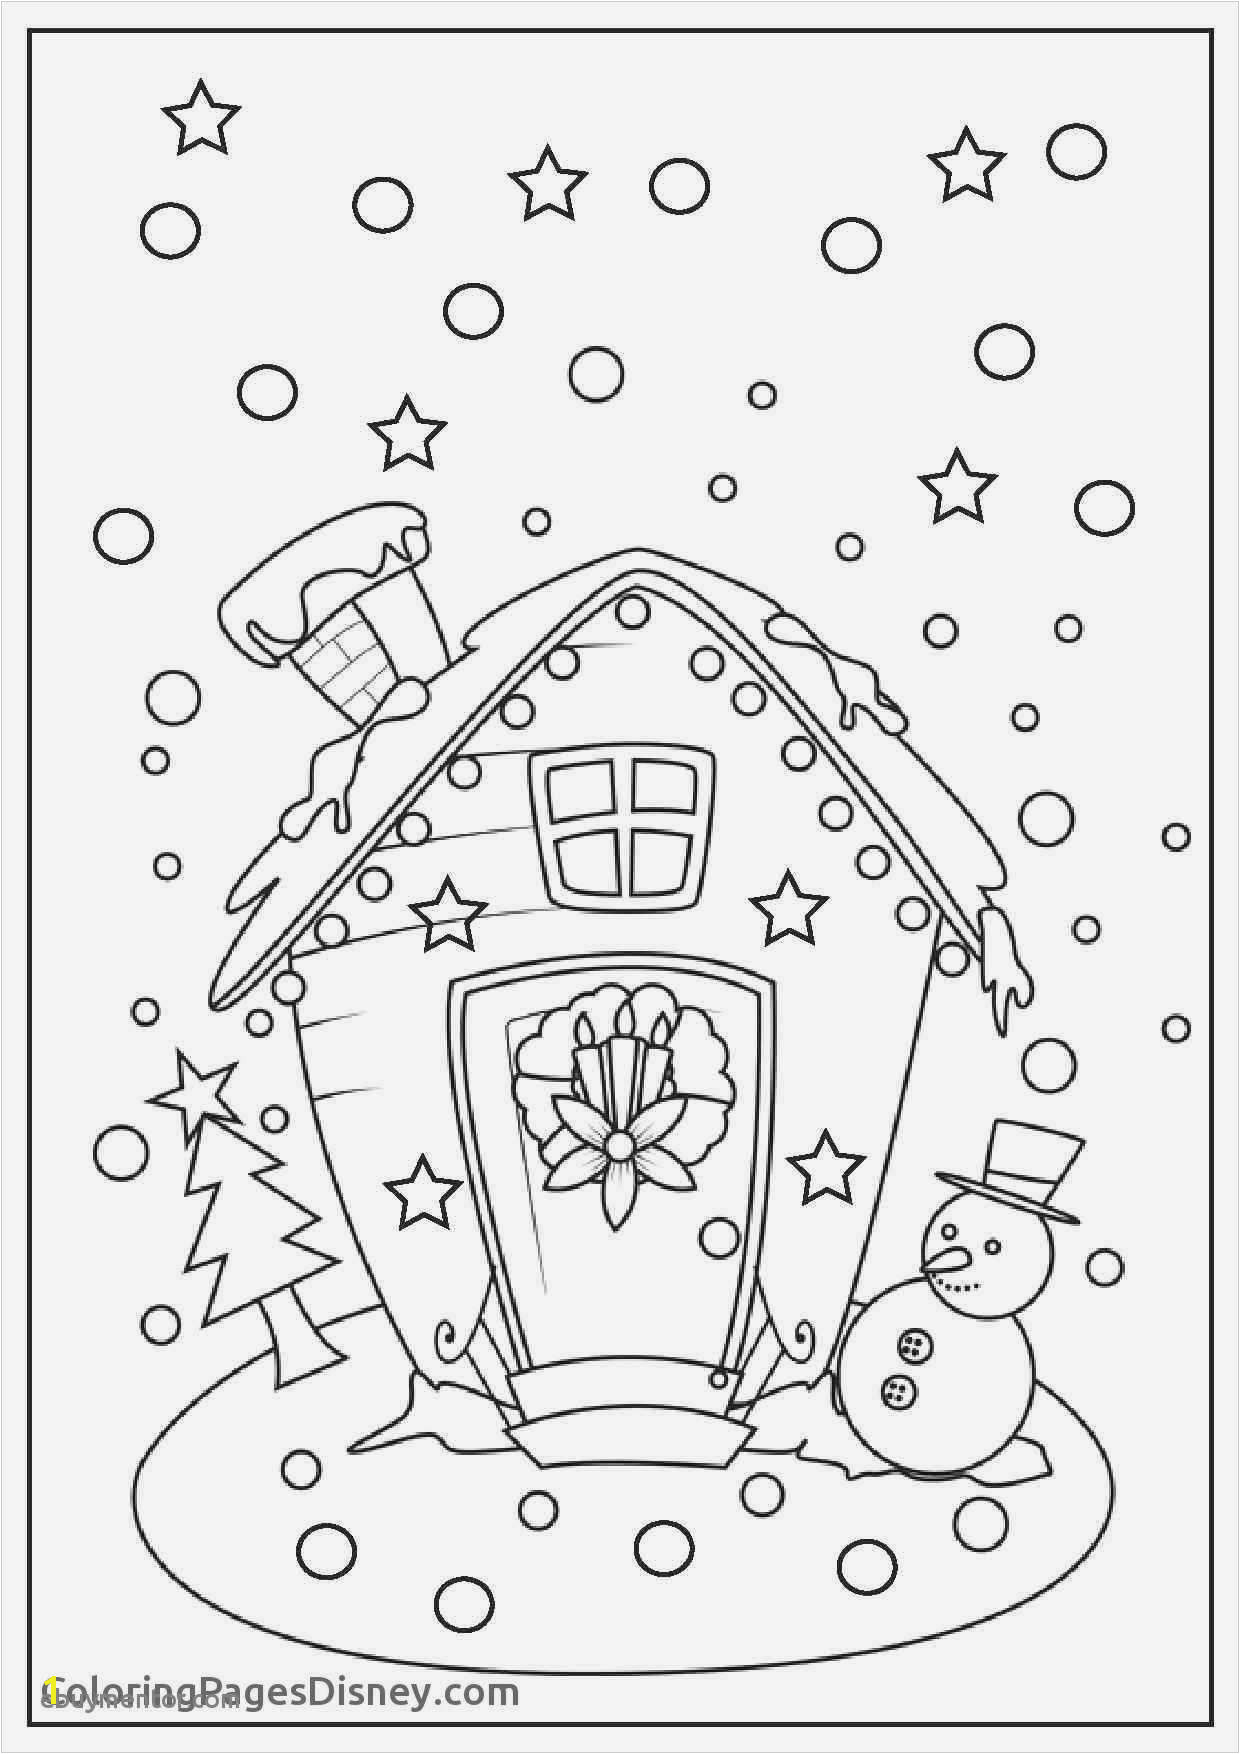 Coloring Pages with Numbers for Preschoolers Free Christmas Coloring Pages for Kids Cool Coloring Printables 0d